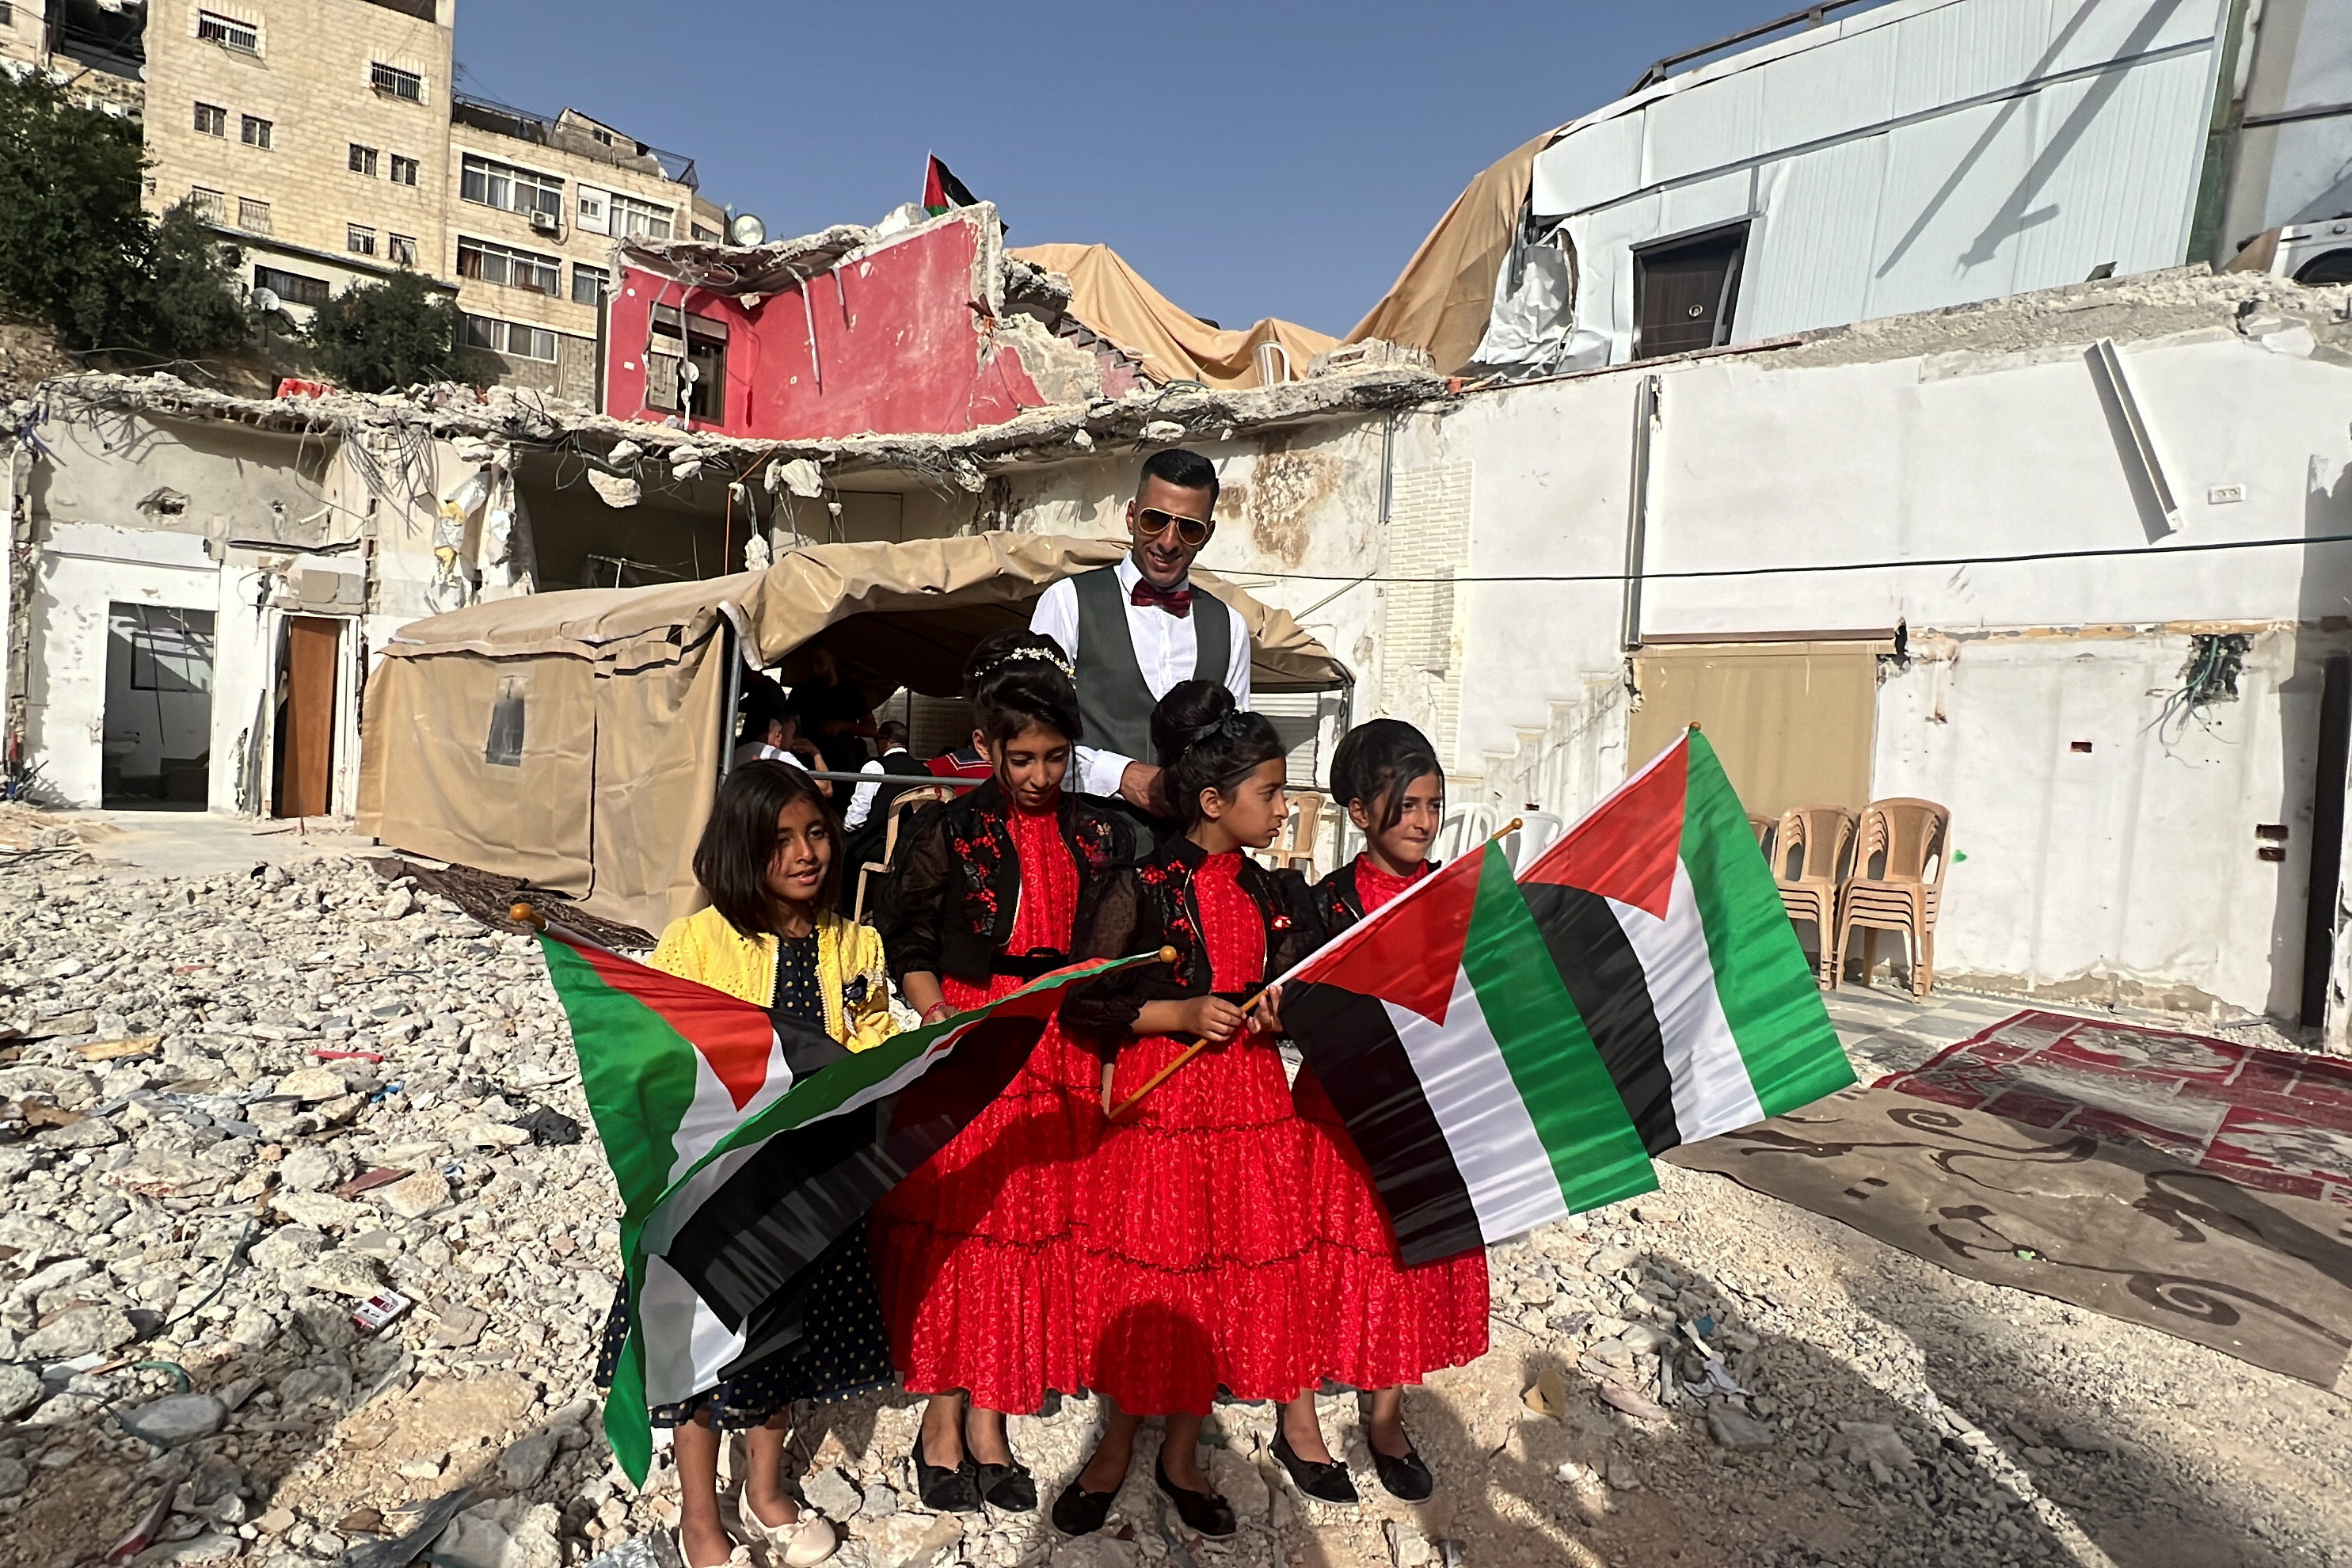 Feras, brother of a Palestinian bride Rabeha Al-Rajabi, stands together with girls during a pre-wedding ceremony at the family's house, that was partly demolished by Israel authority, in East Jerusalem